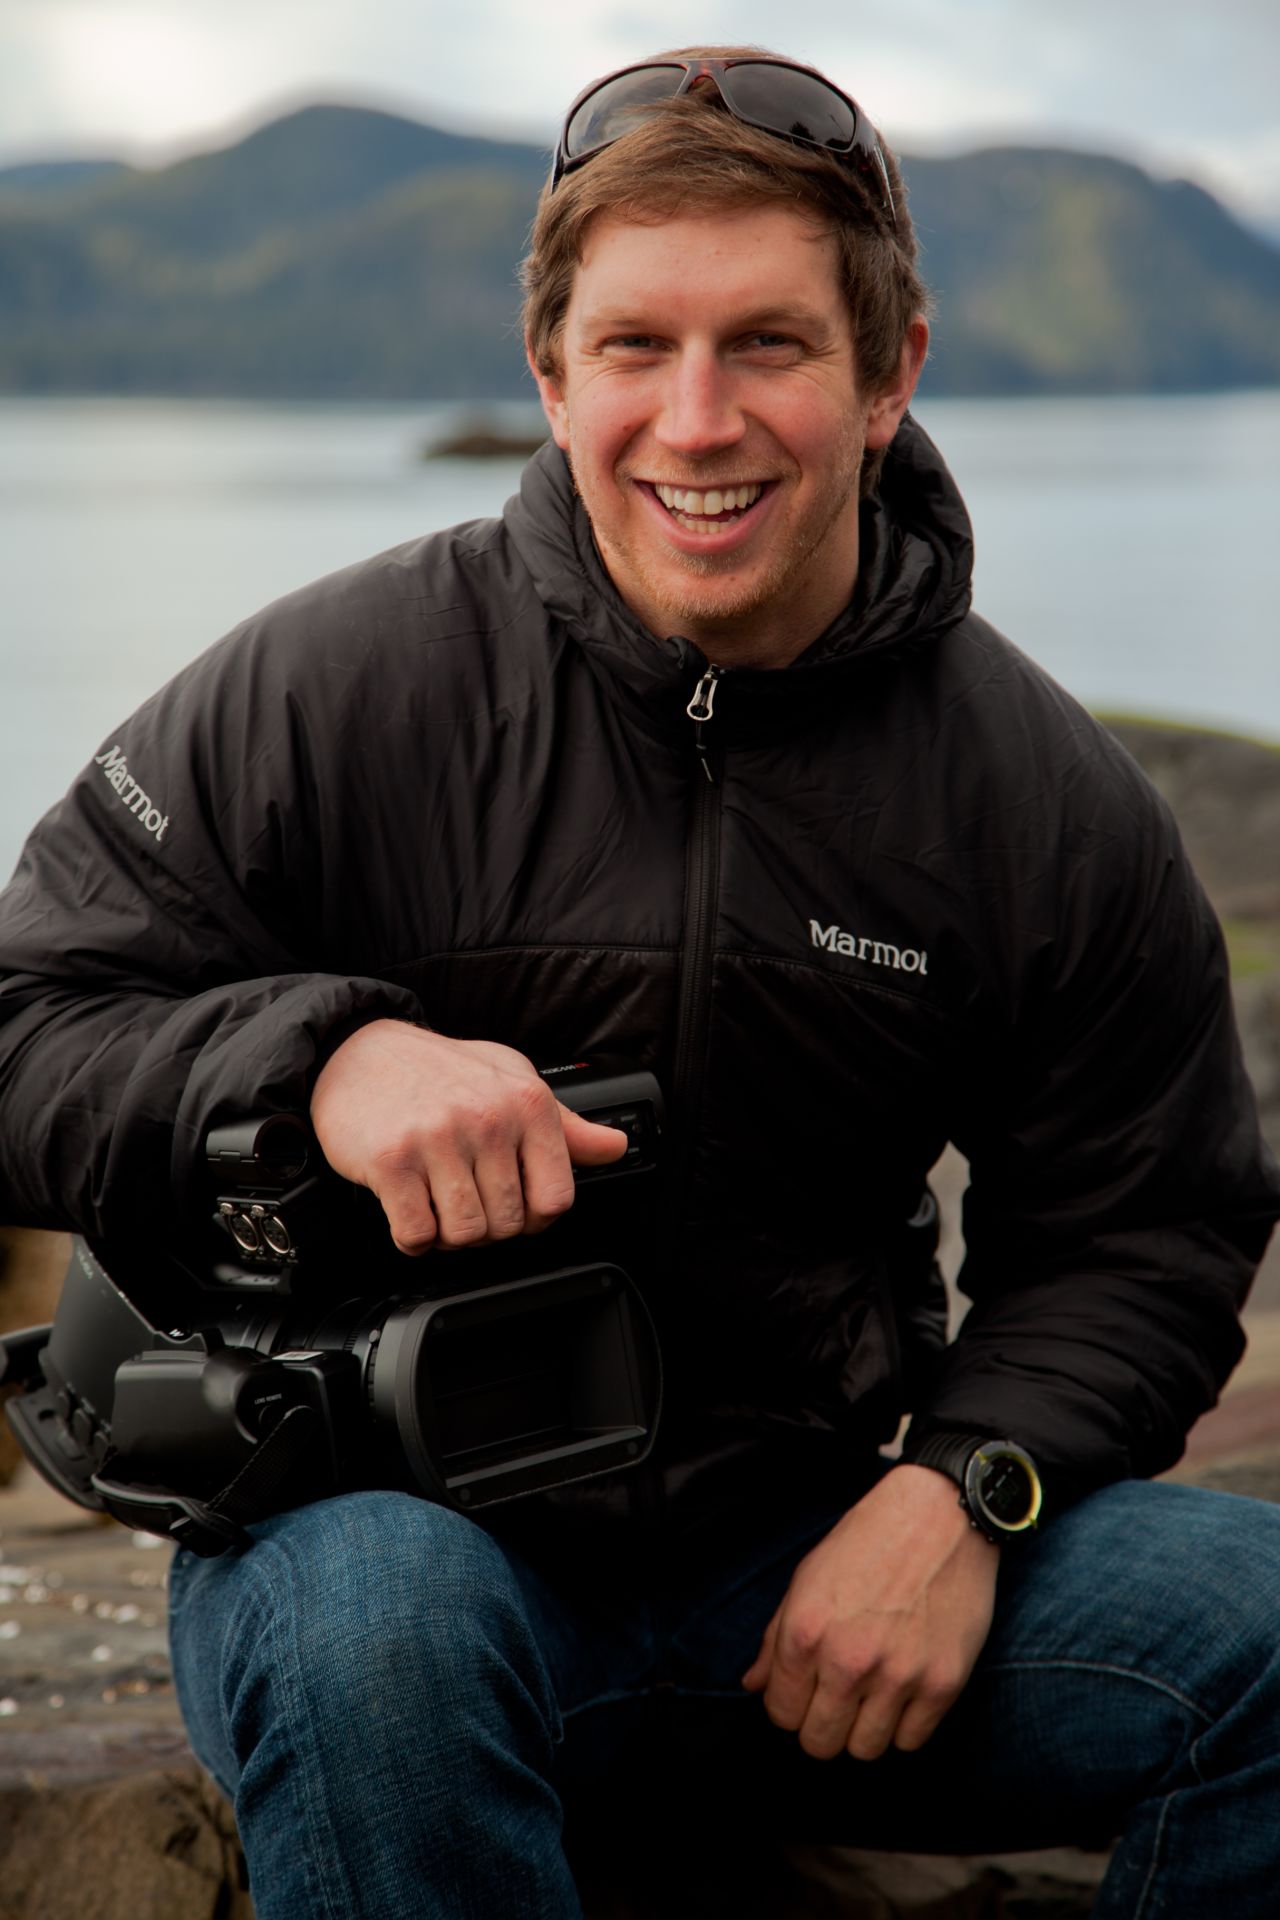 Erik Osterholm is a producer who has found himself on sailboats in Antarctica, helicopters above the Bering Sea and tucked deep in the jungles of Indonesia. He is passionate about telling stories from the hard-to-reach, remote corners of the world.